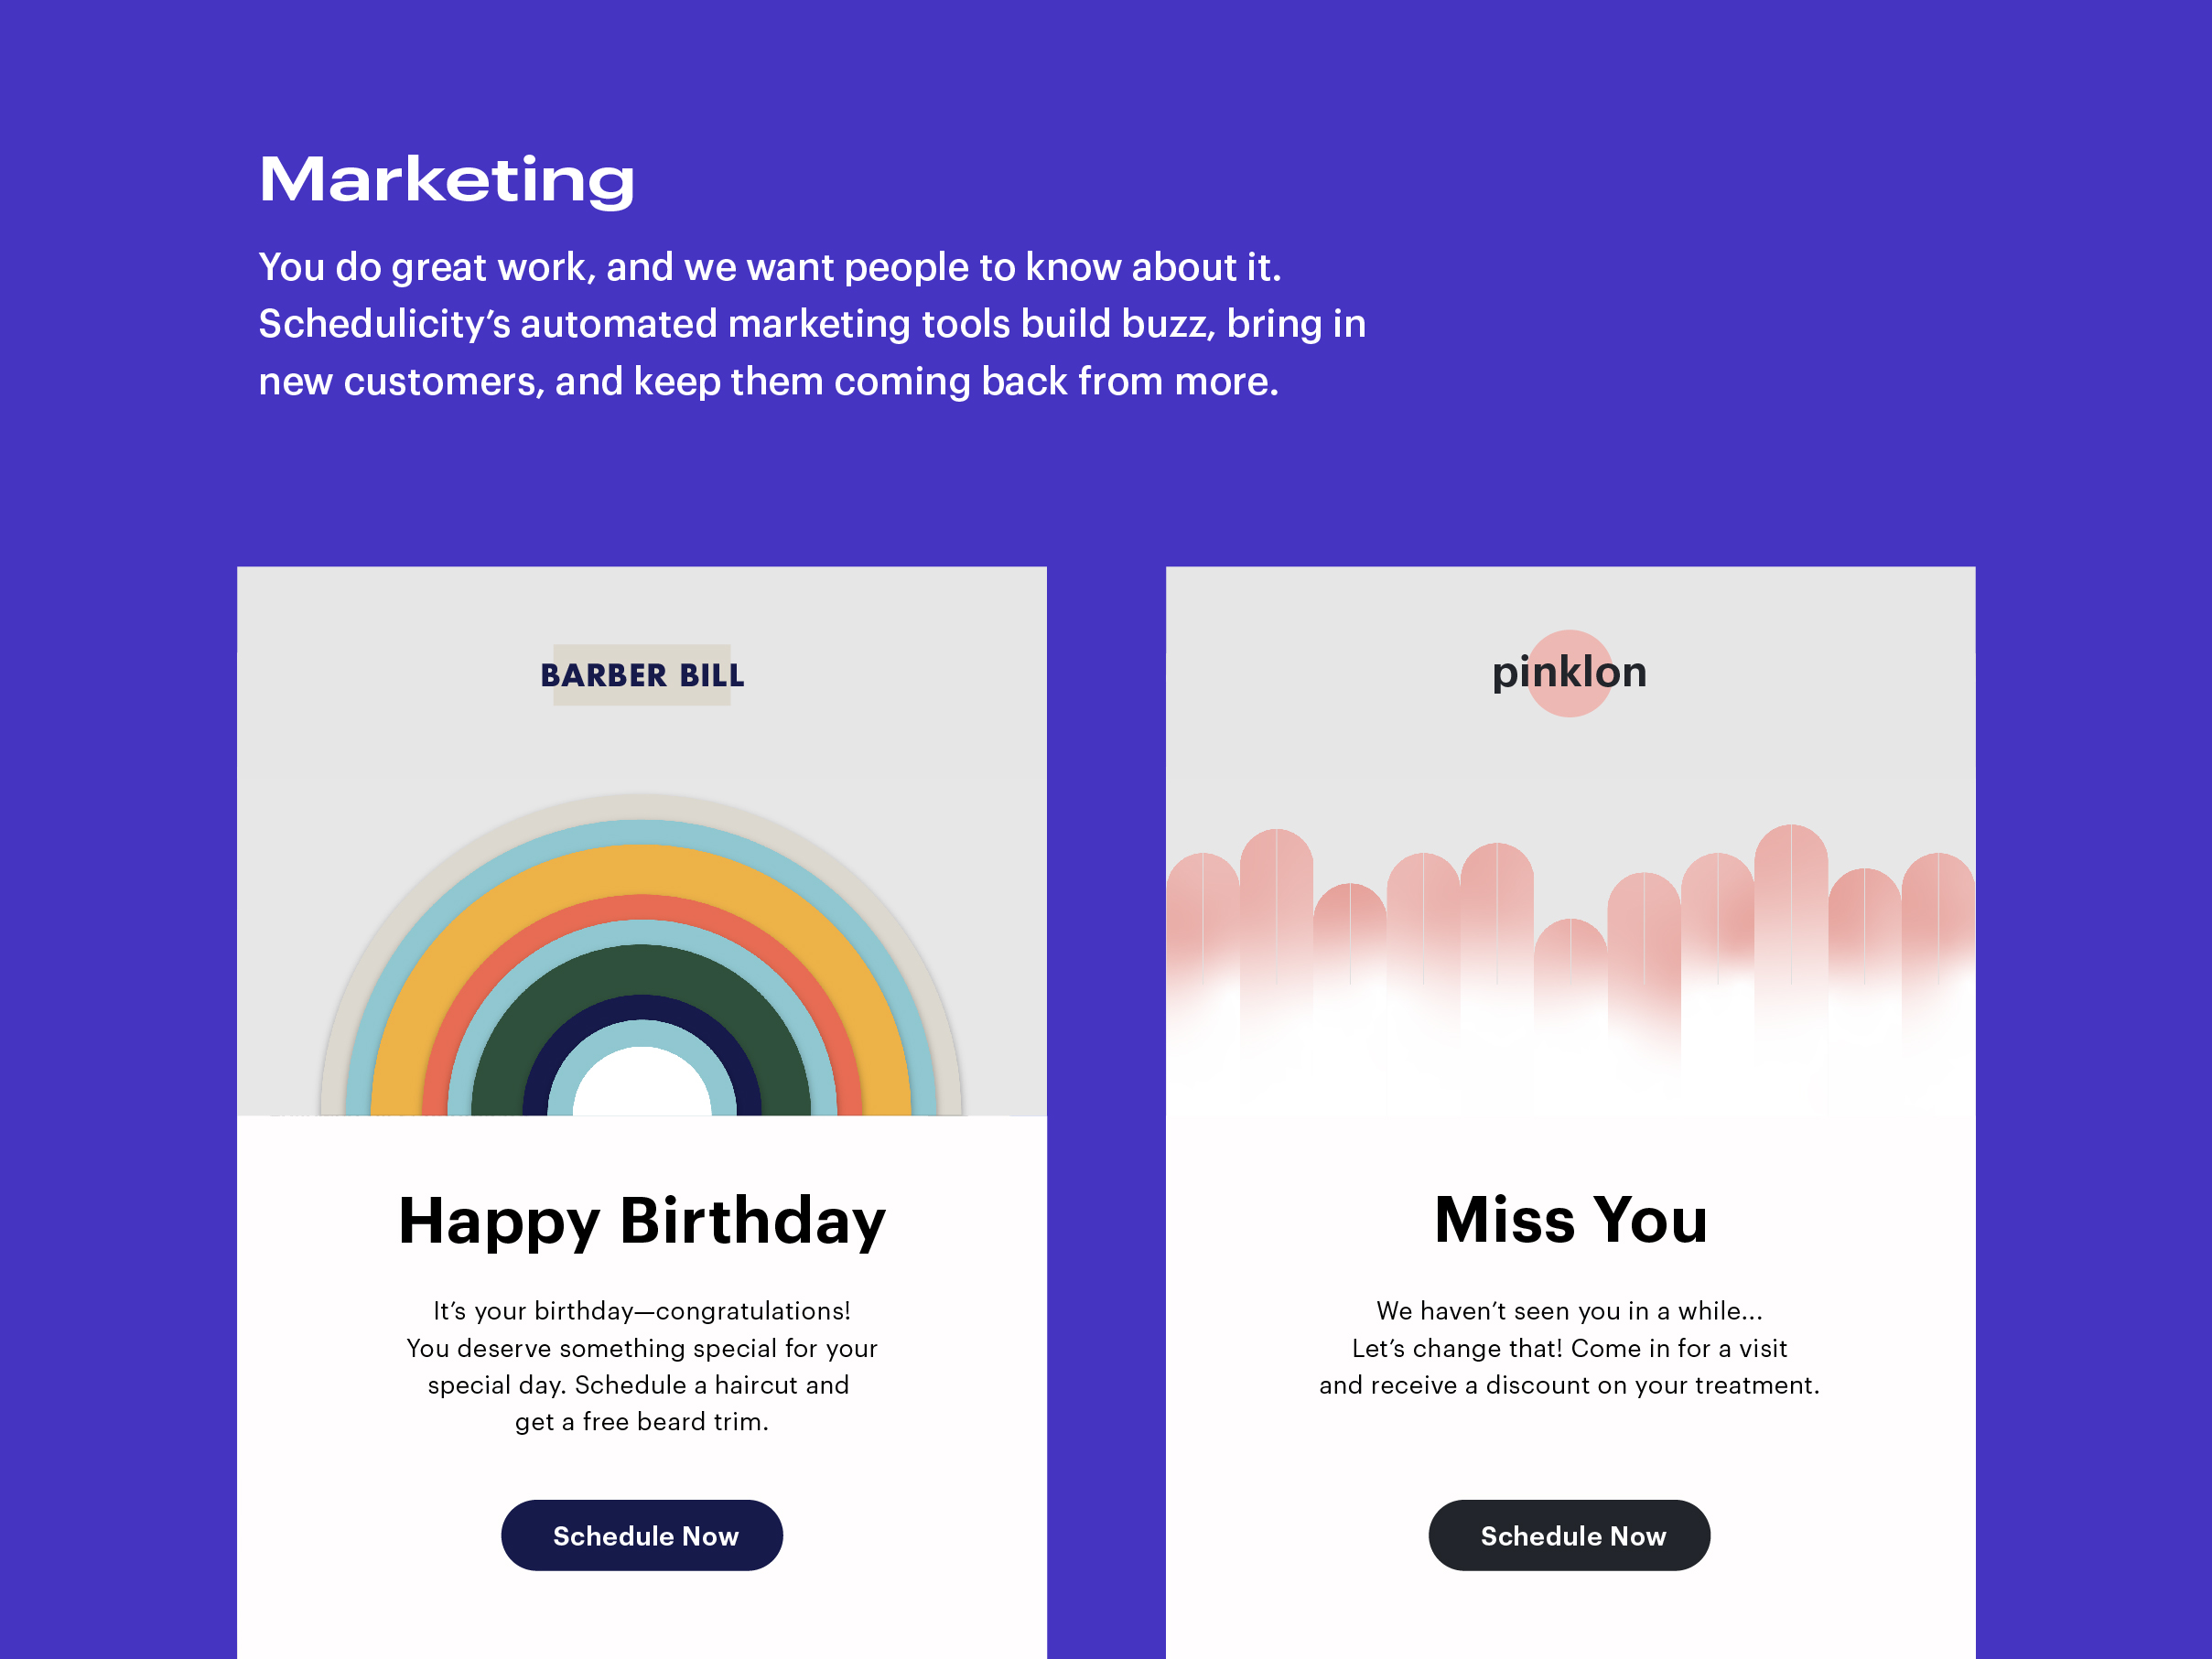 Marketing: You do great work, and we want people to know about it. Schedulicity's automated marketing tools build buzz, bring in new customers, and keep them coming back from more.